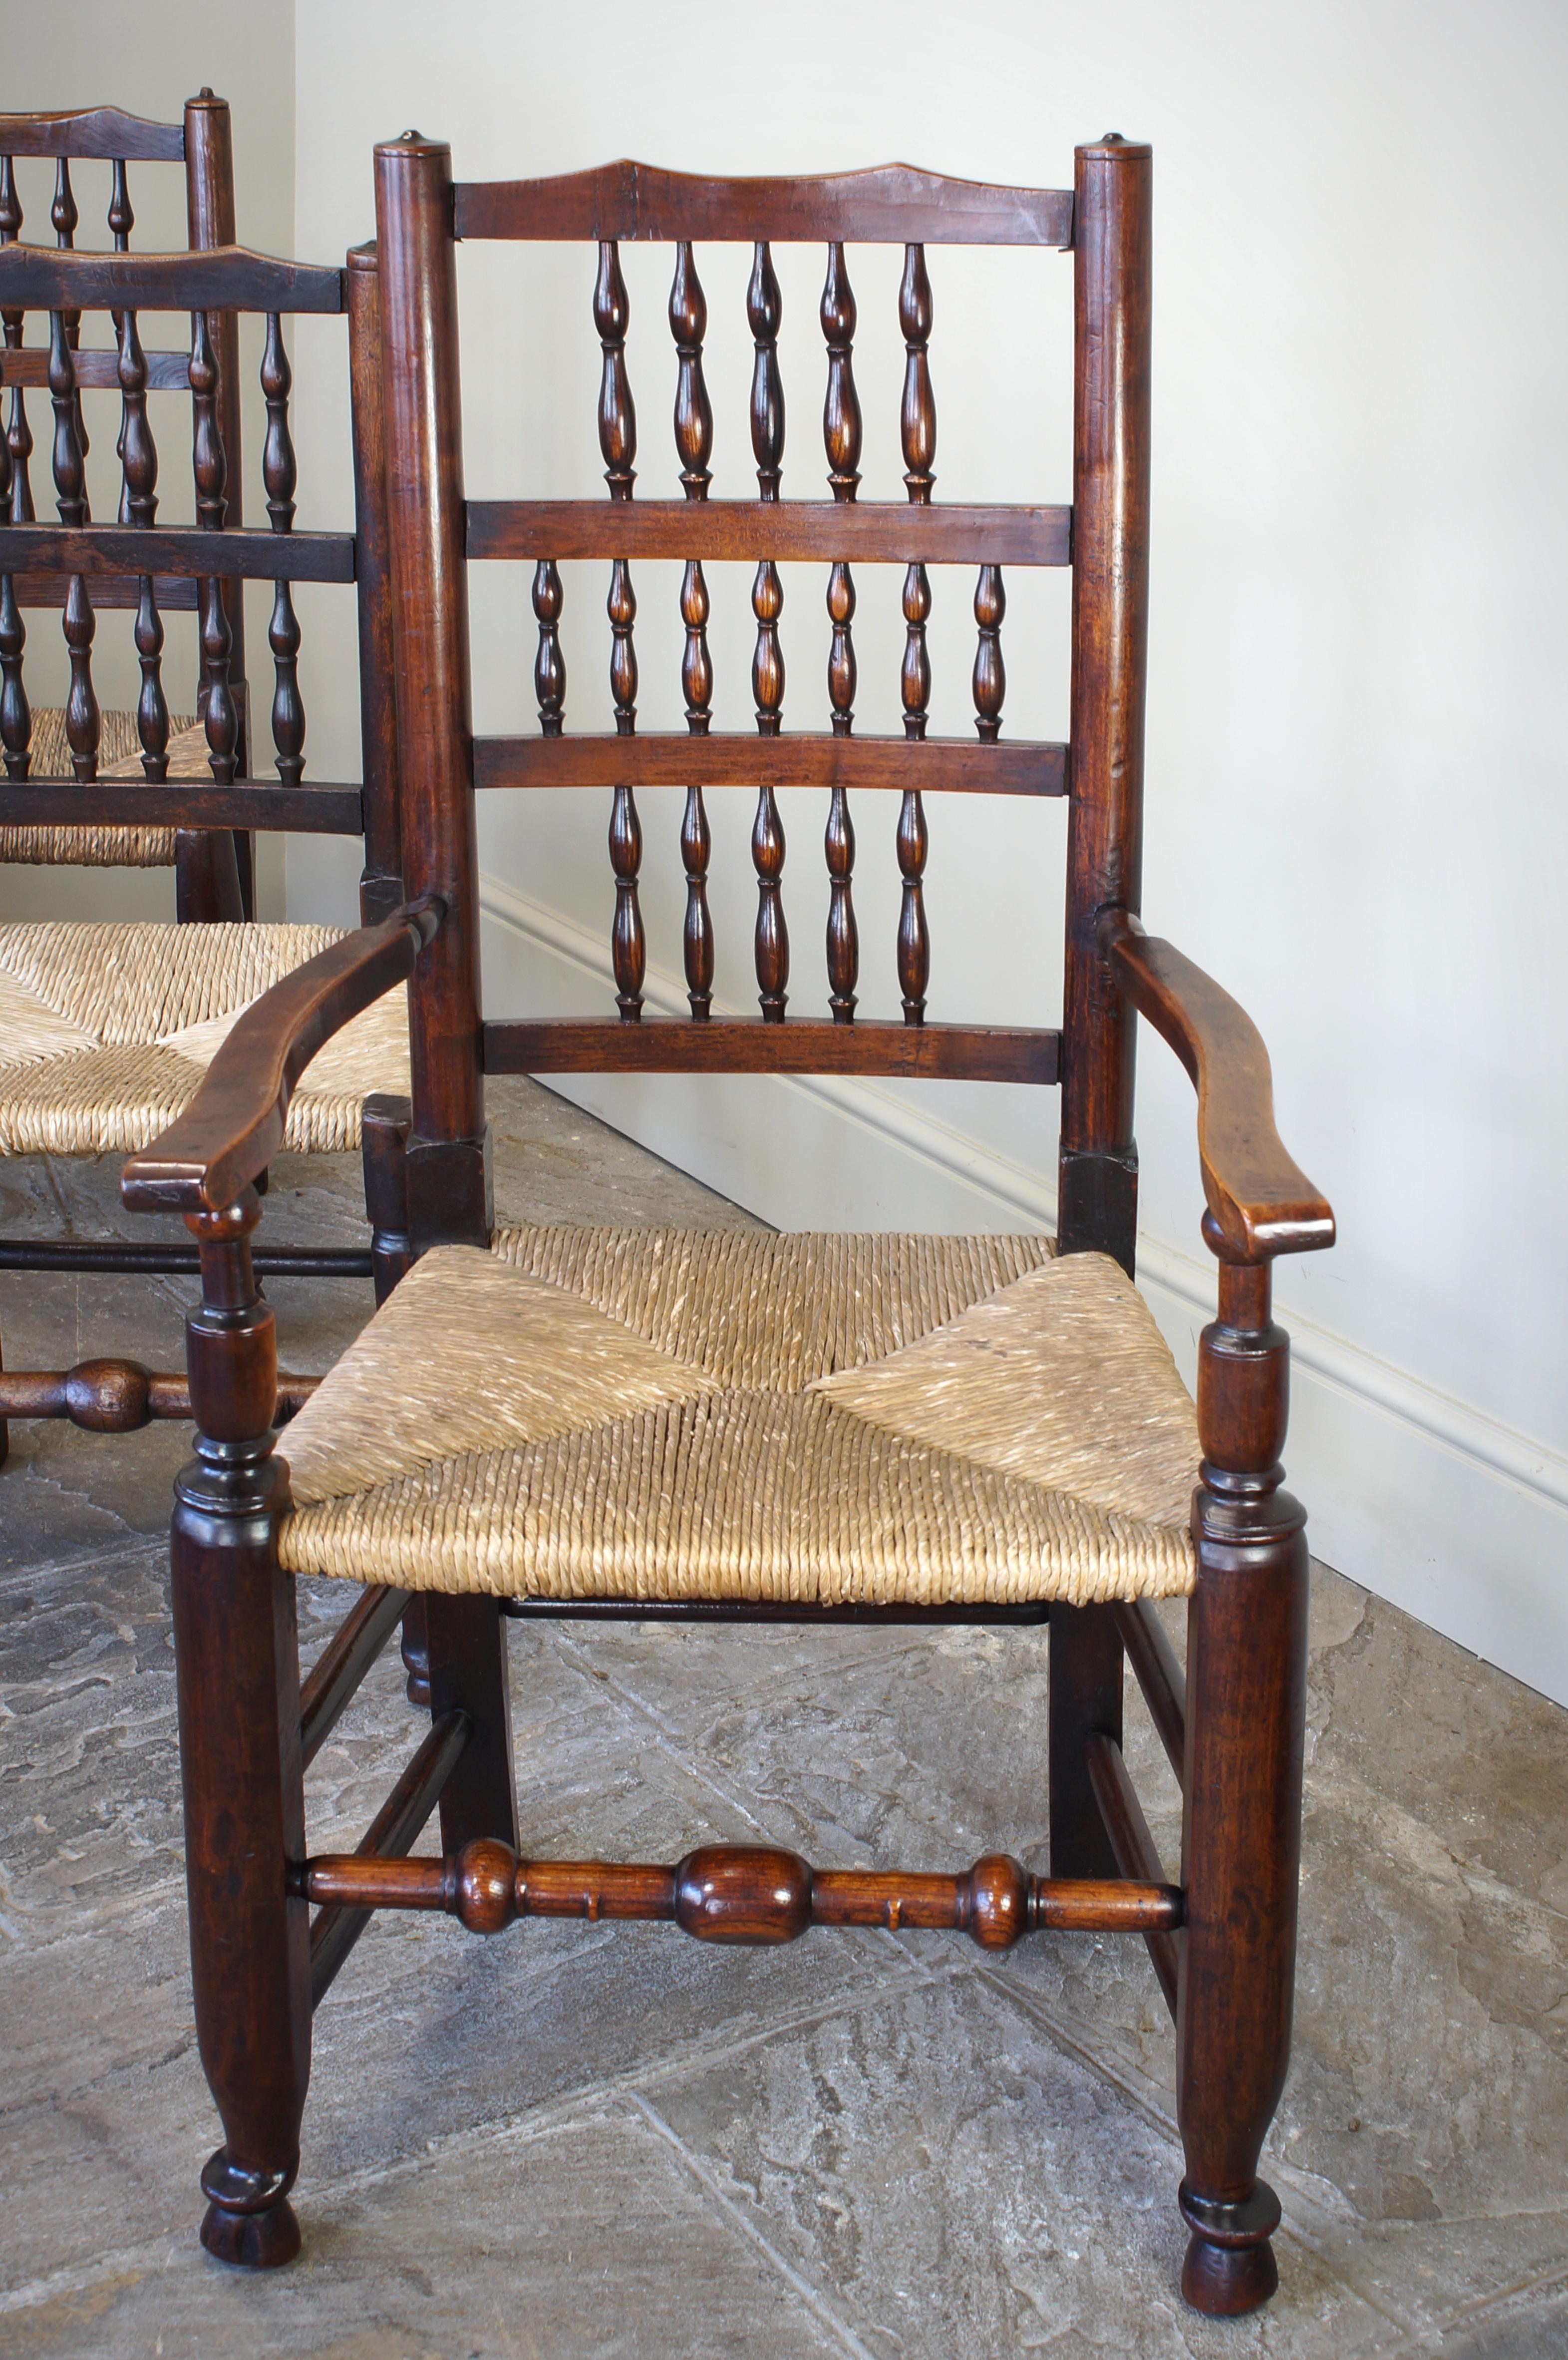 This ash and elm mixed Set of 8 Lancashire spindle back chairs are
made in the desirable Lancashire spindle back design.
The mixed set consists of a pair of armchairs and 6 side chairs.
All have their original rush seats, that are in good